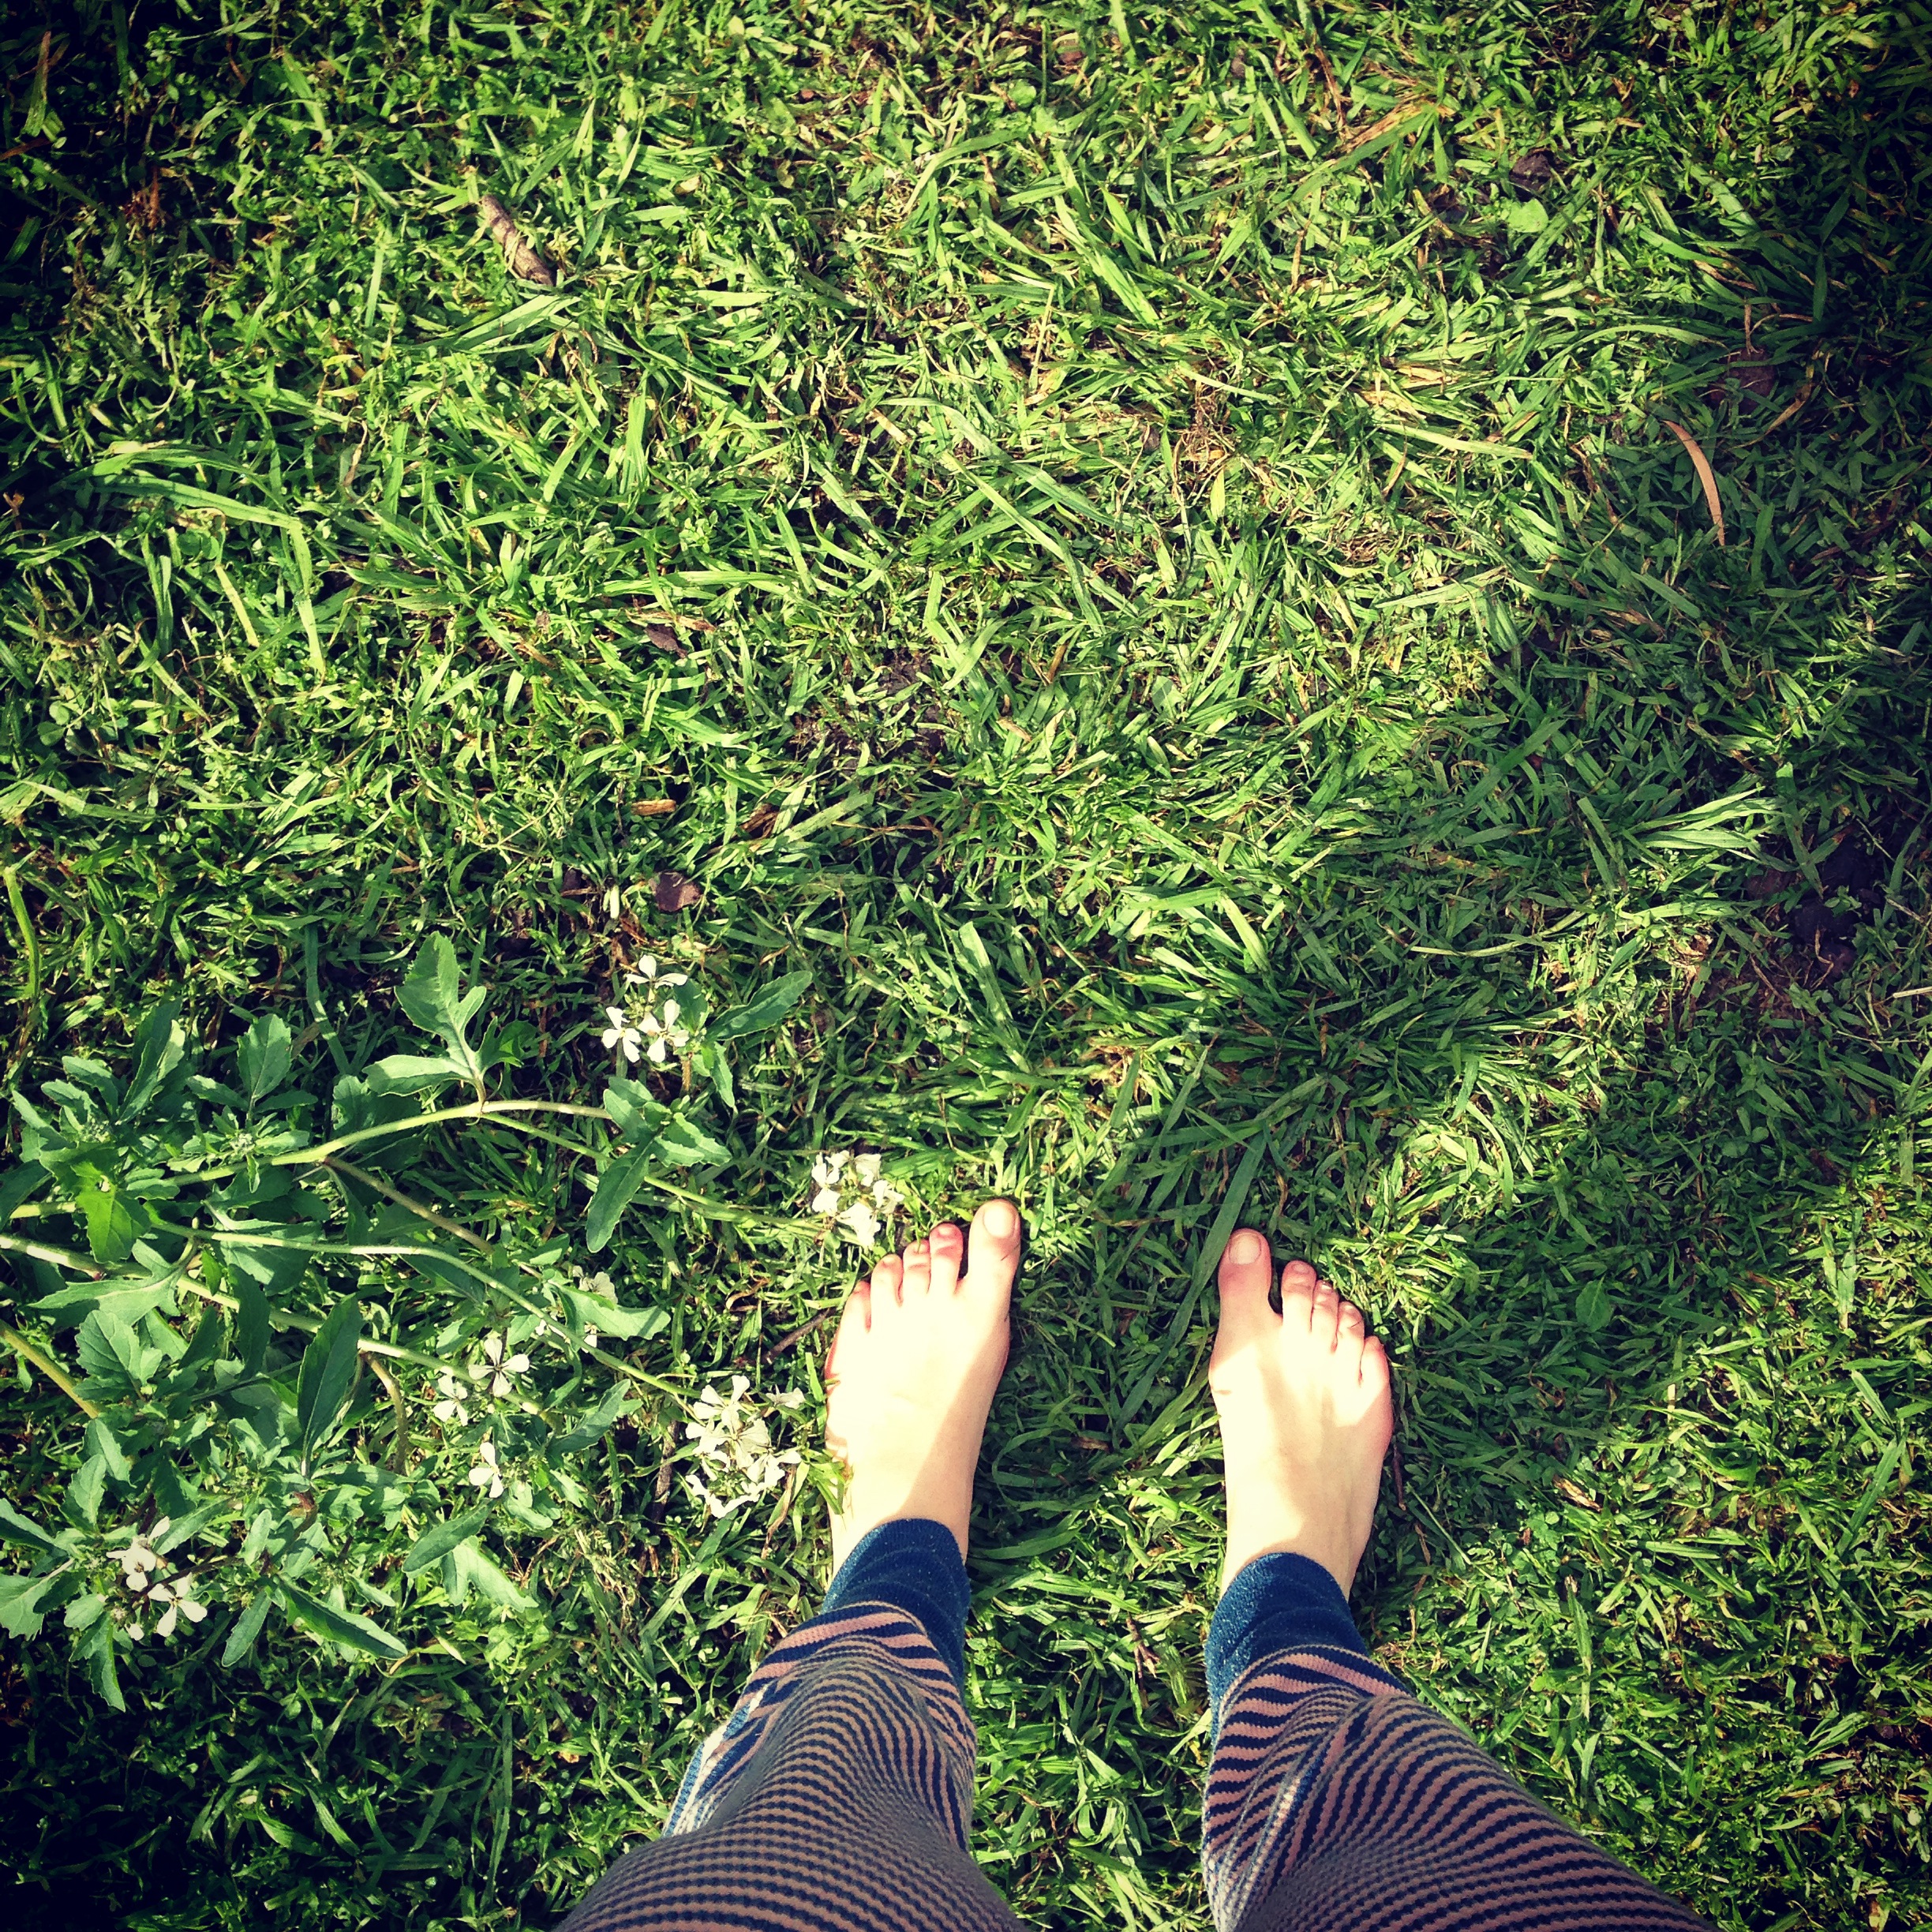 Barefoot On Grass Wallpapers High Quality | Download Free